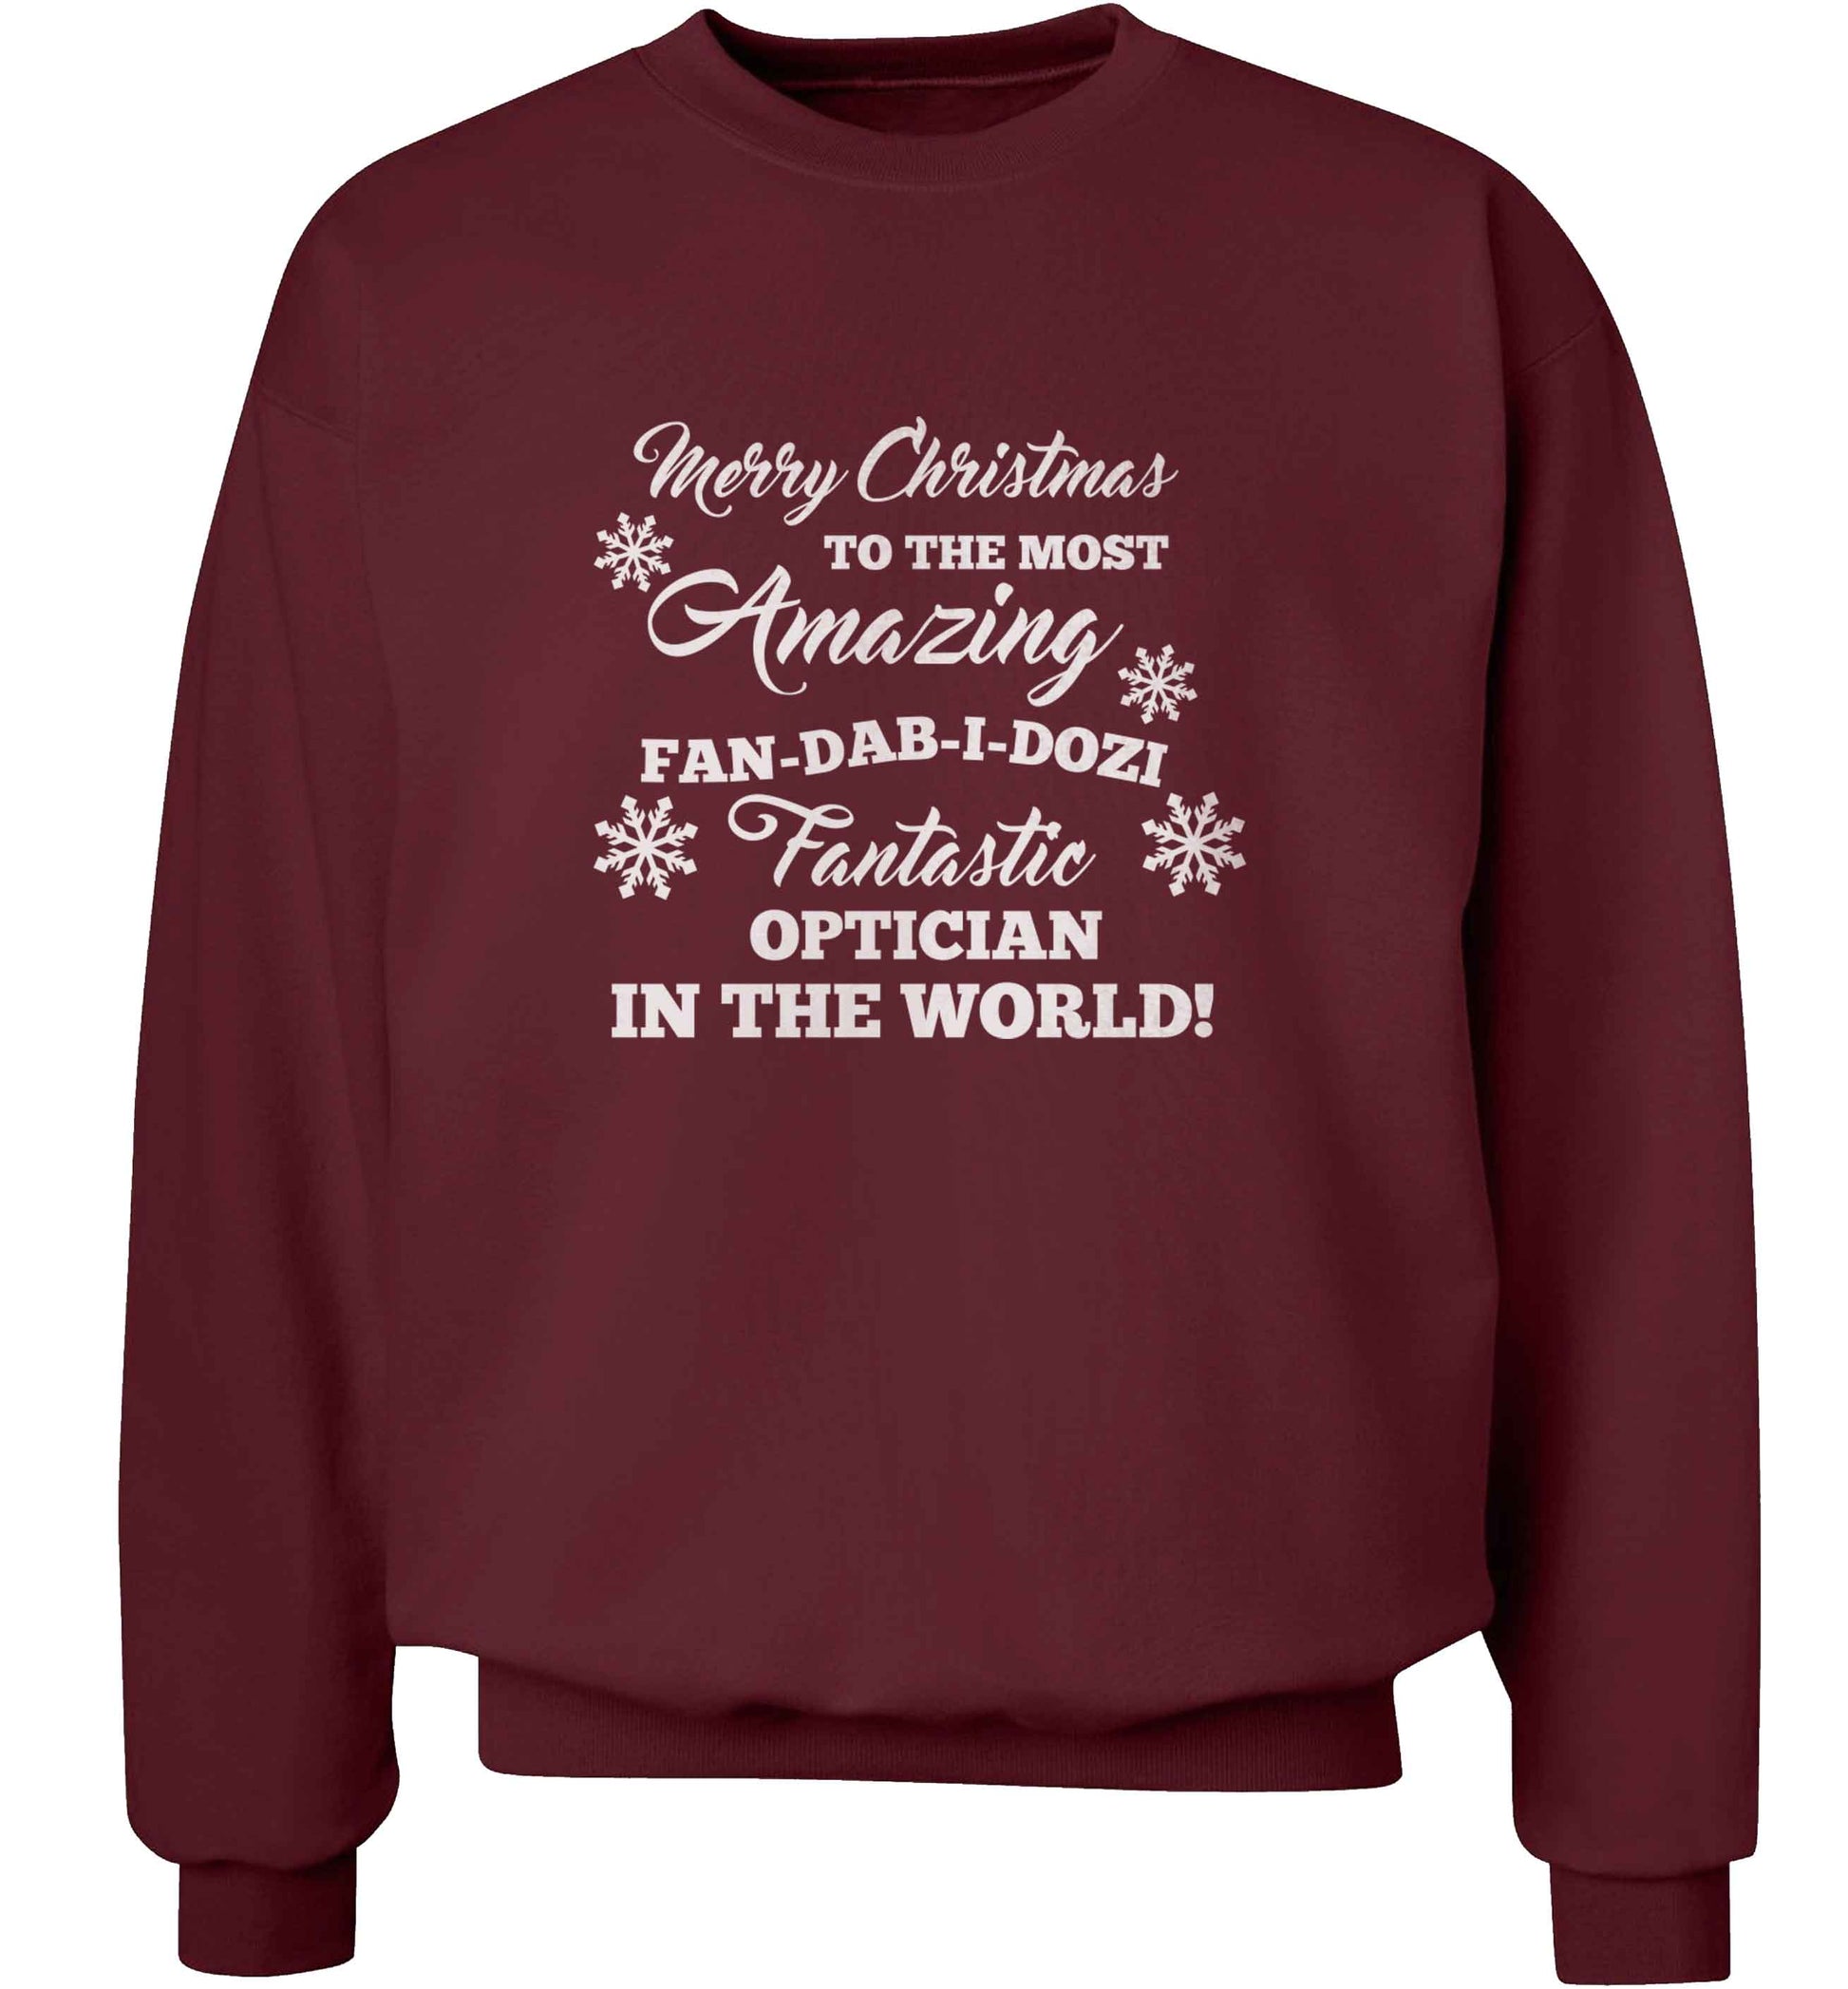 Merry Christmas to the most amazing optician in the world! adult's unisex maroon sweater 2XL